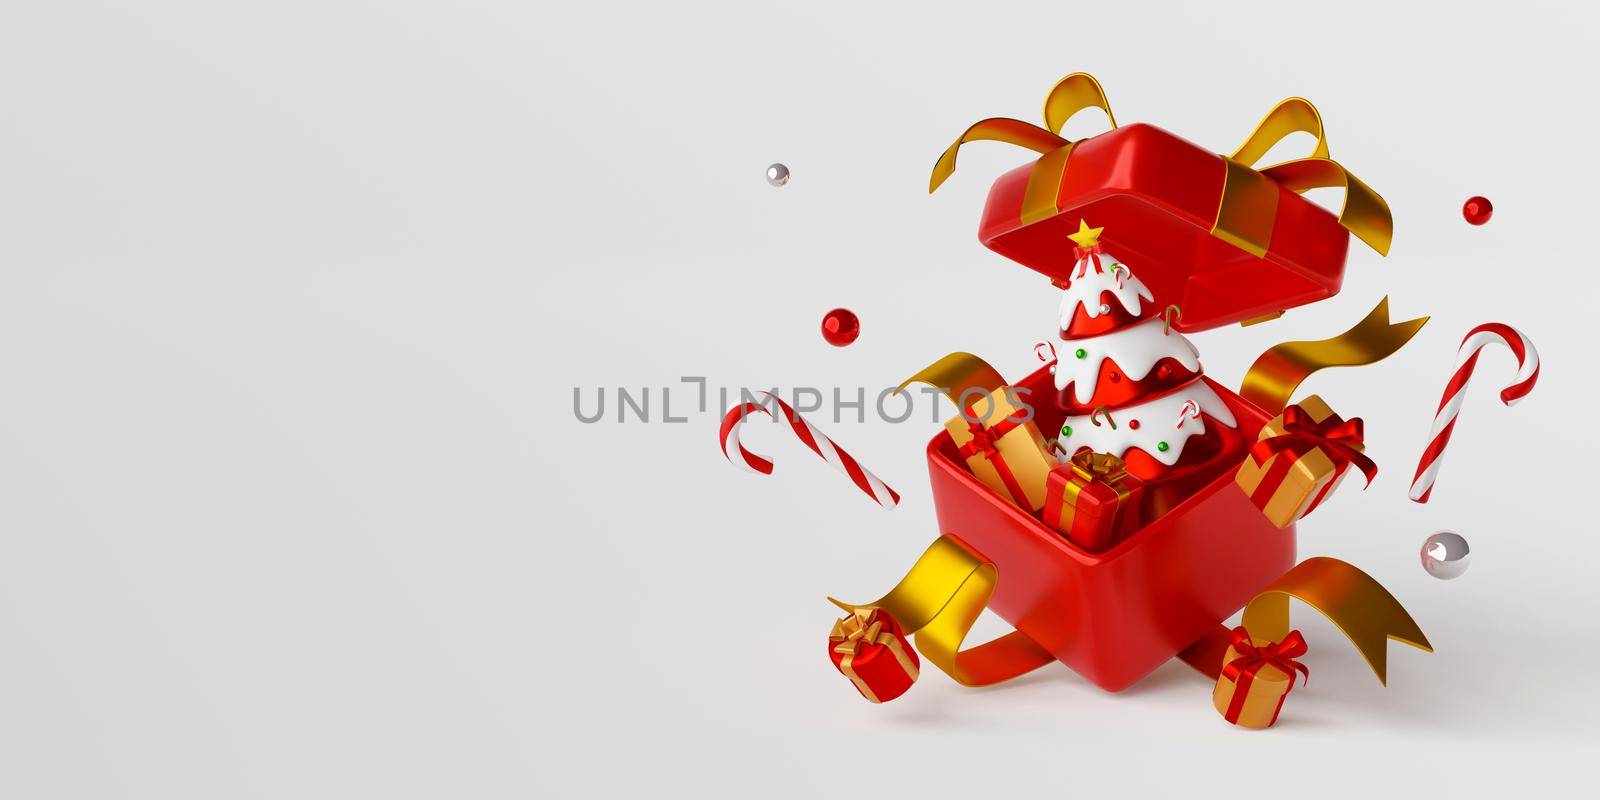 Christmas banner of Christmas tree with present in big gift box, 3d illustration